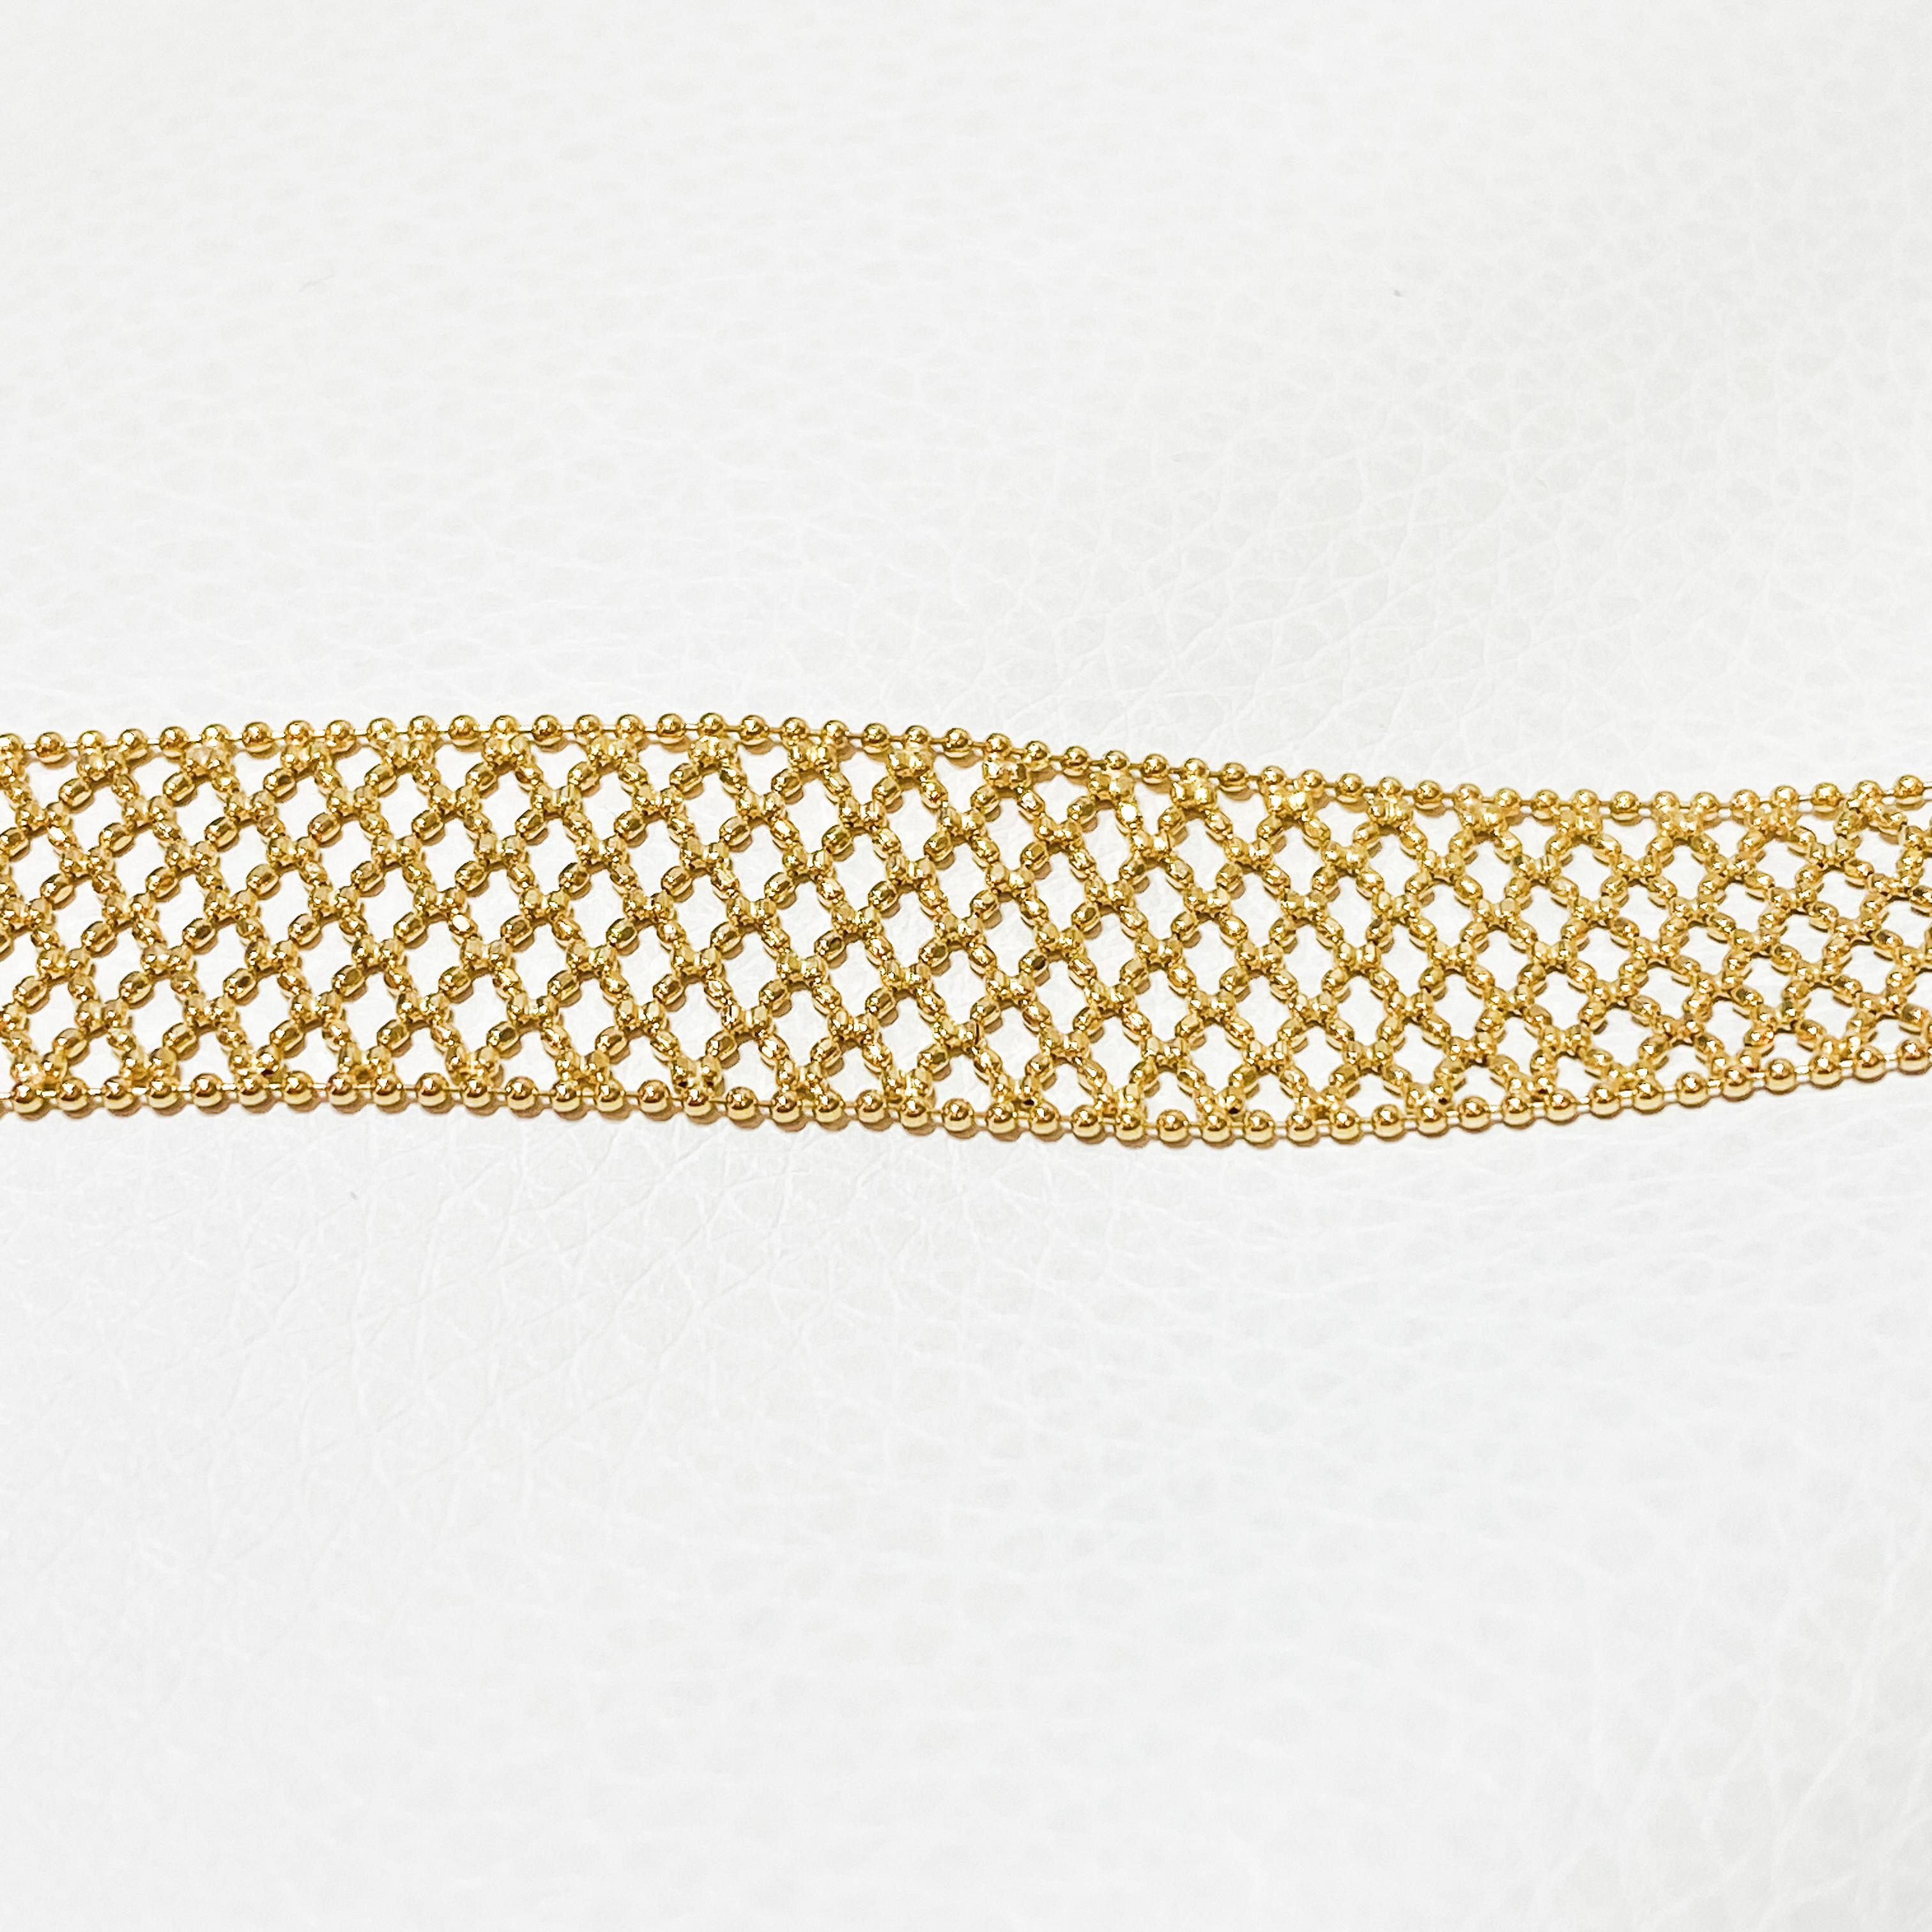 This spectacular bracelet is made of pure 18 karat yellow gold. The bracelet is in pristine condition and has never been worn.  It measures 7.25 inches long and can be worn by almost any size woman’s wrist.
Please check out our other listing for